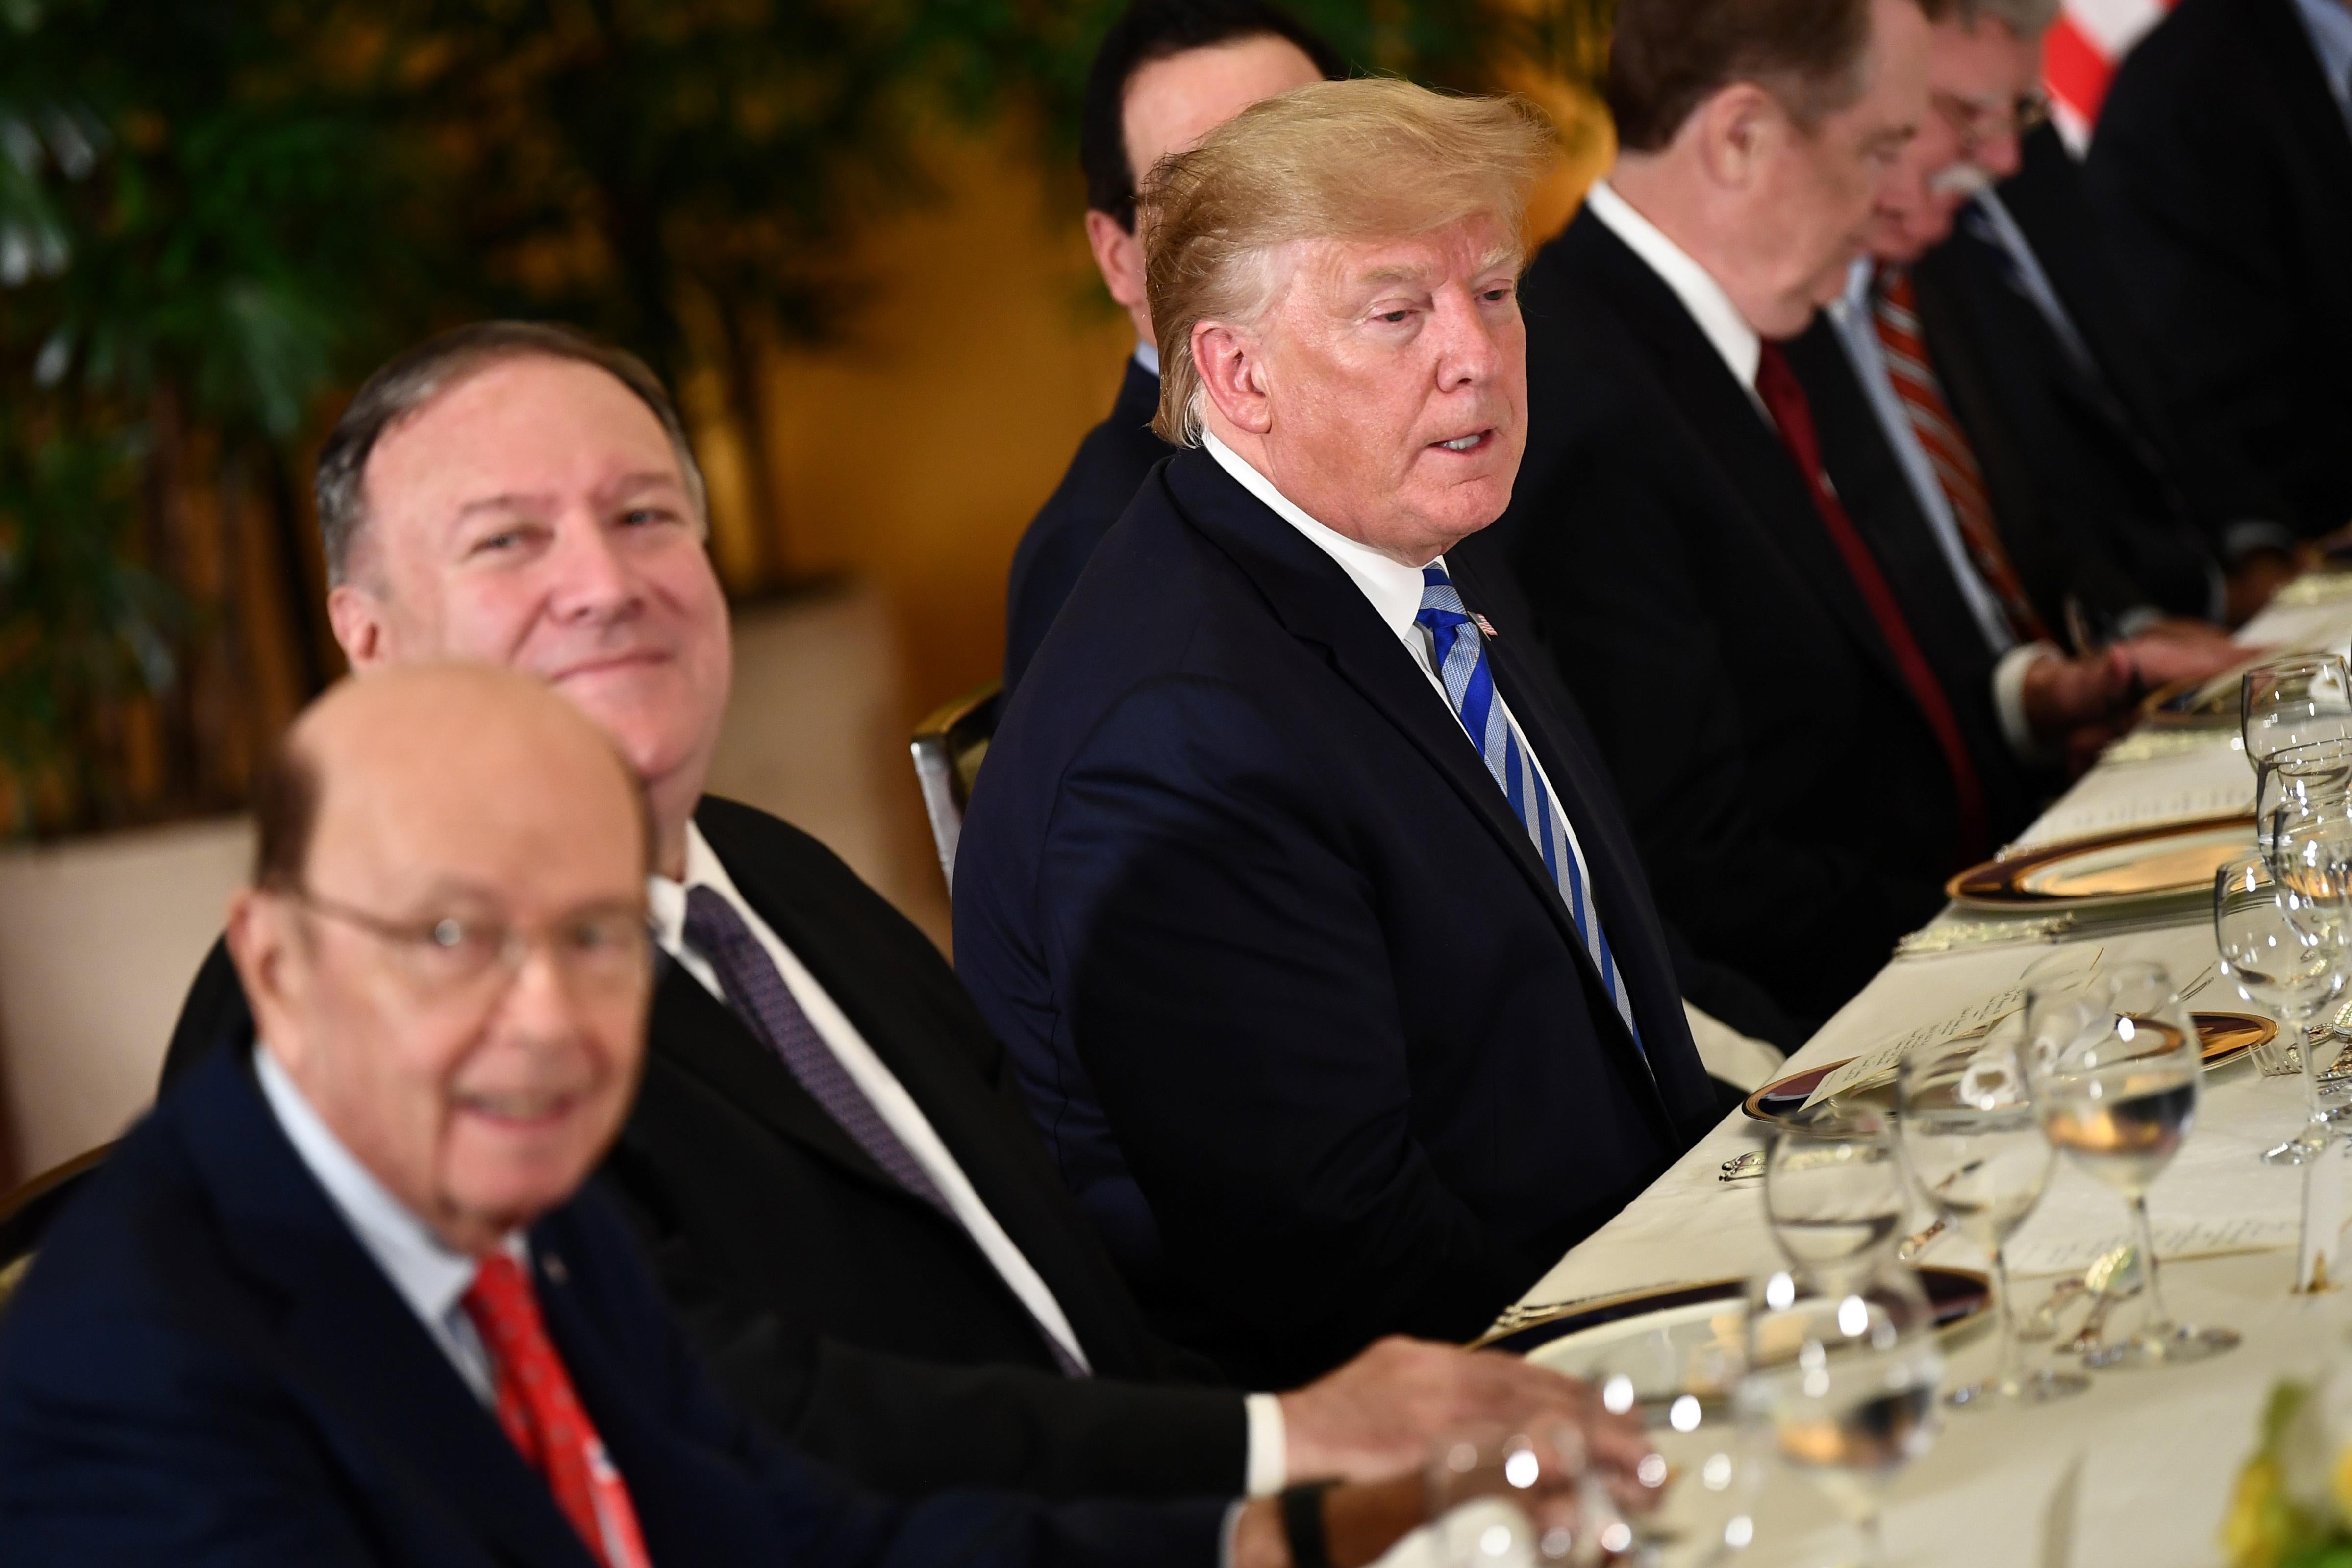 President Donald Trump sits with Secretary of State Mike Pompeo and Secretary of Commerce Wilbur Ross at a dinner.